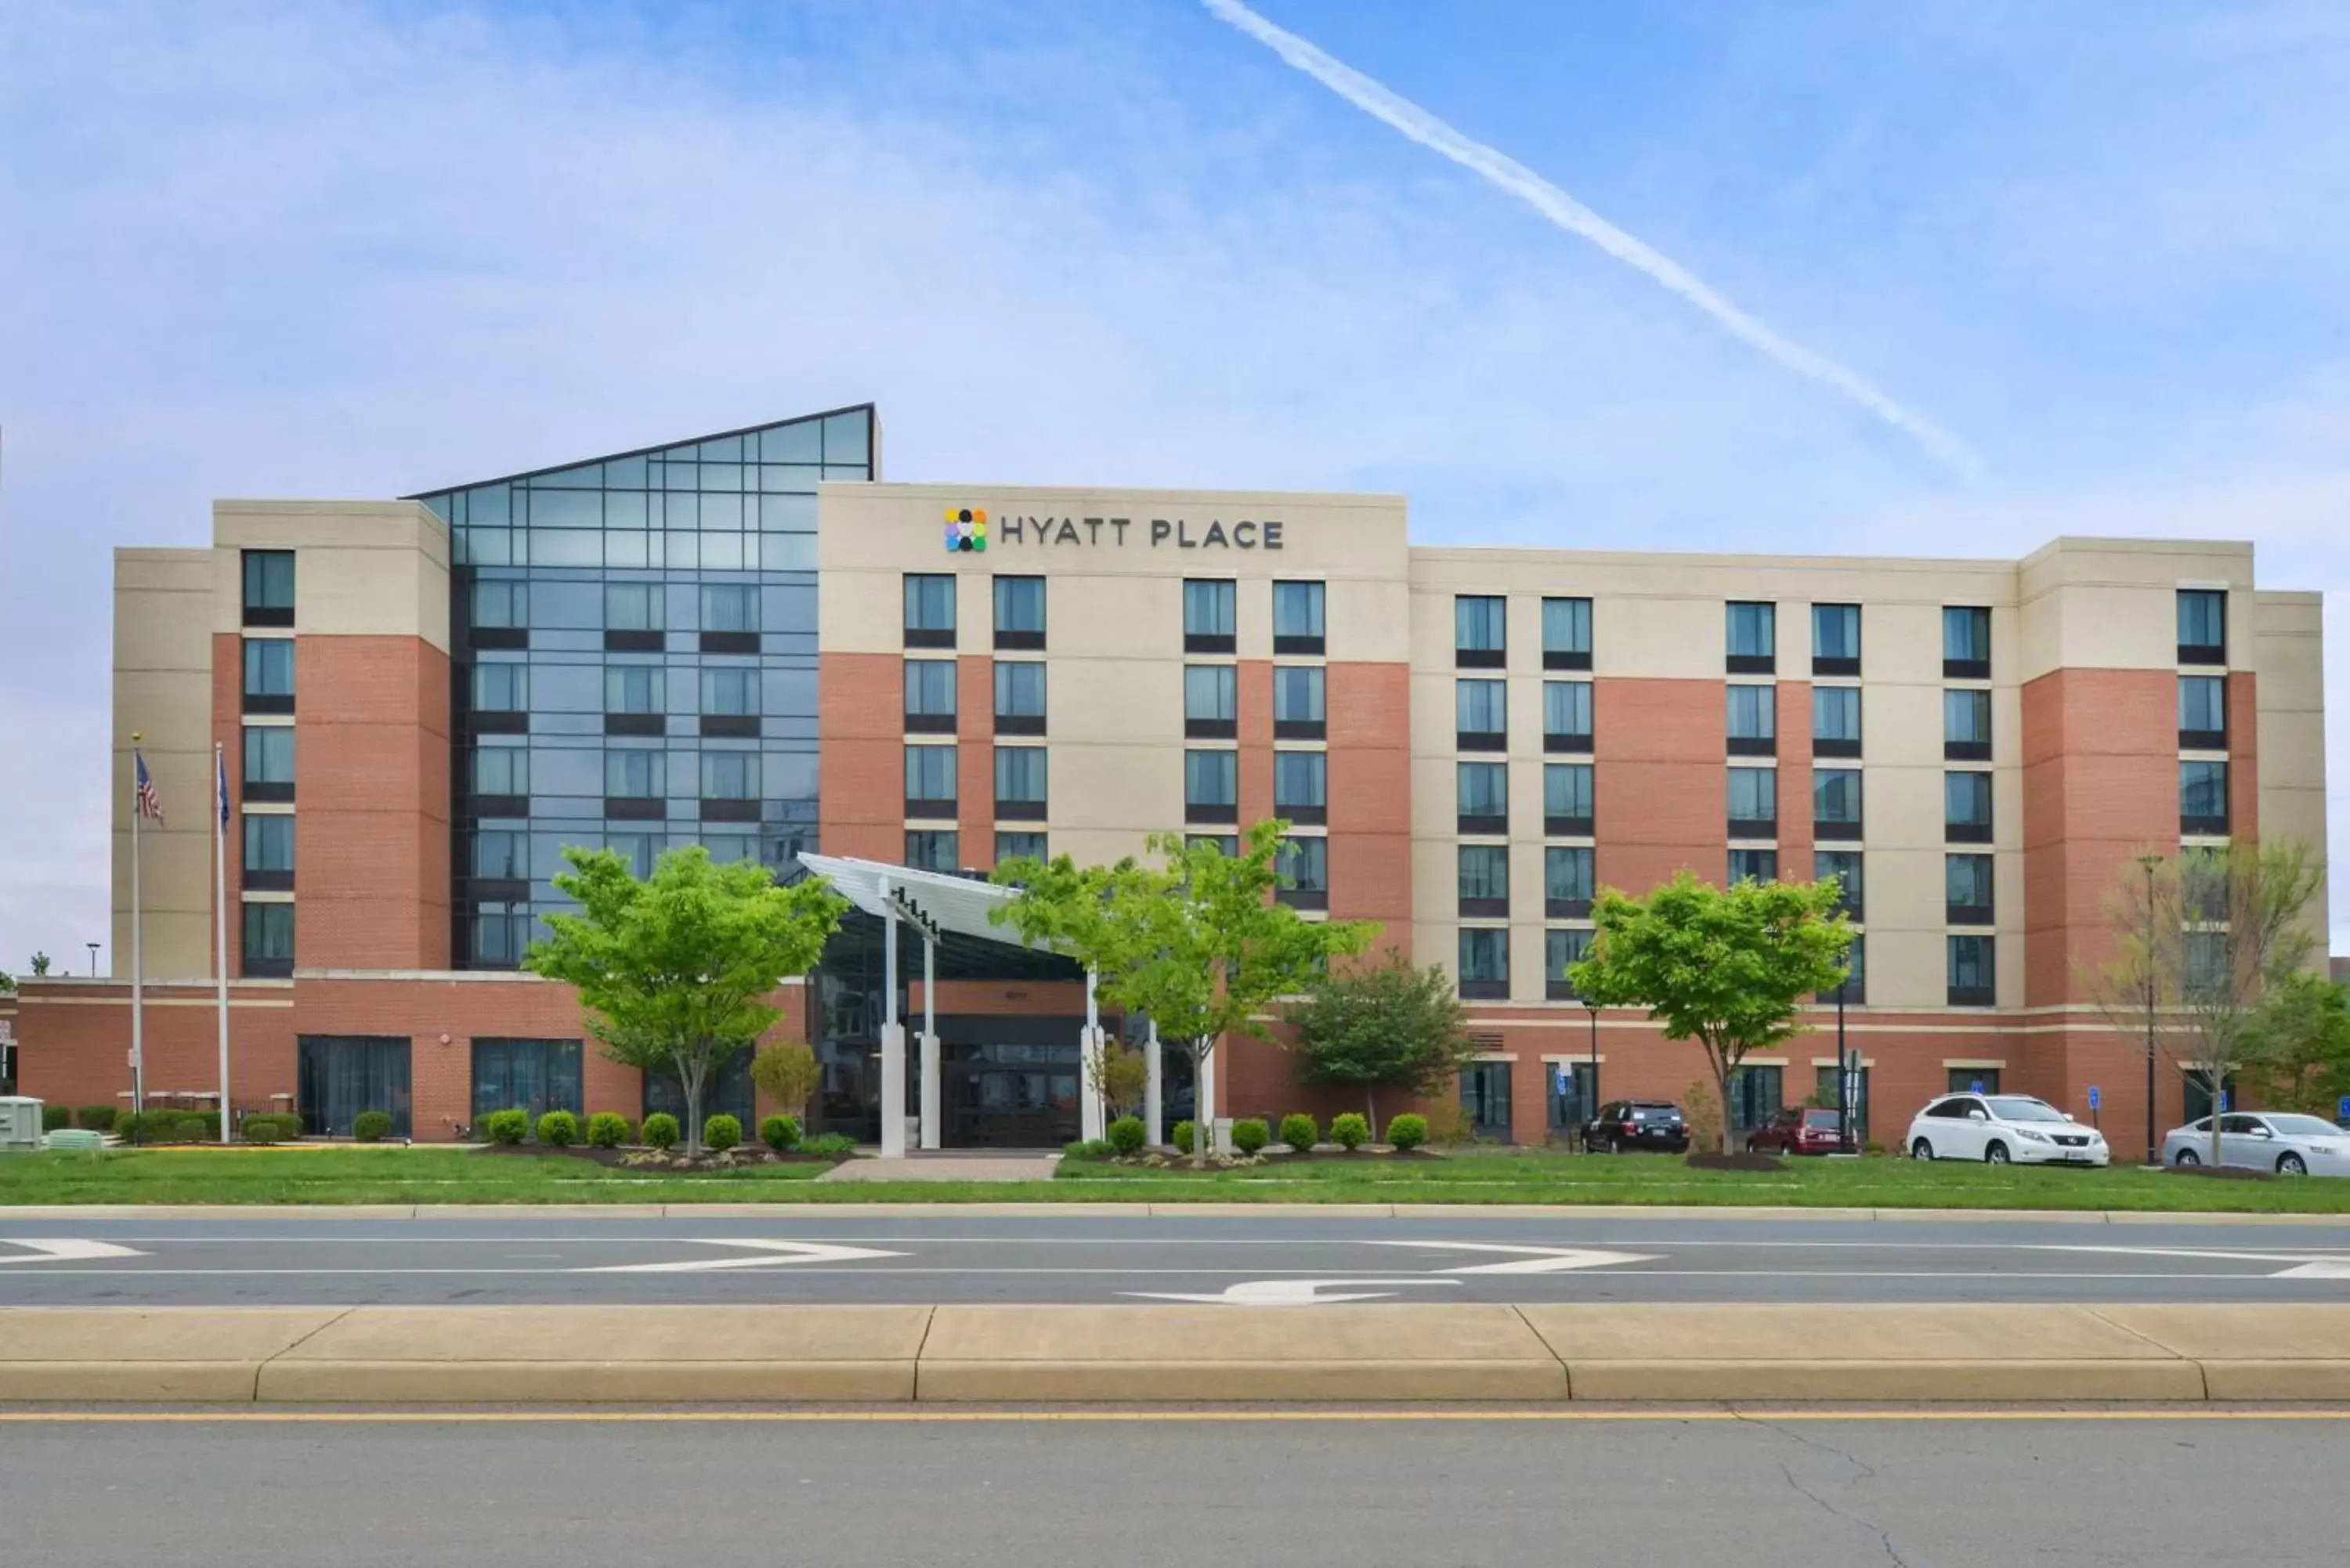 Property building in Hyatt Place Herndon Dulles Airport - East